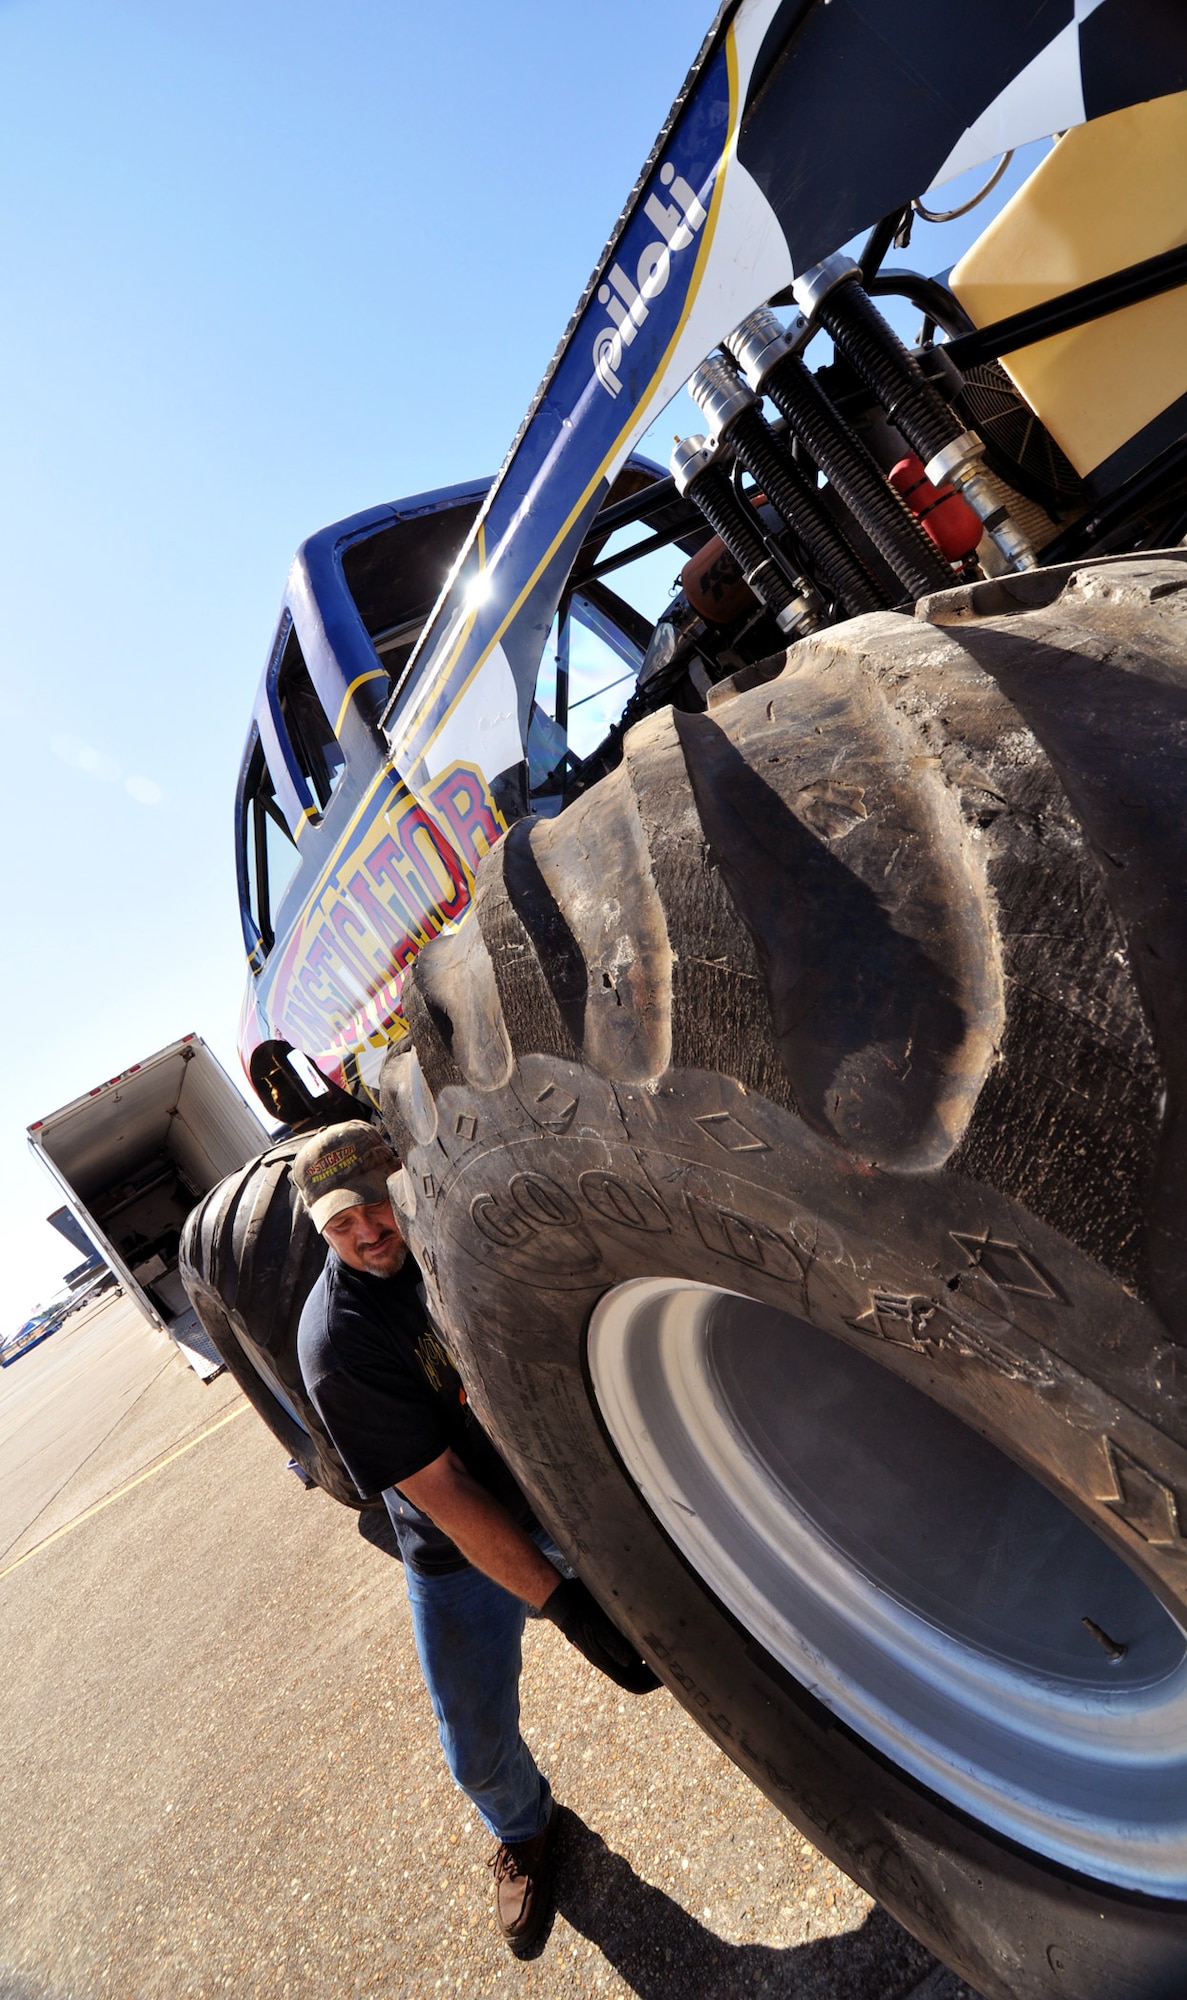 Lionel Easler rolls the "monster" tires into place on his truck "The Instigator," April 9 in preparation for the weekend airshow at Eglin Air Force Base, Fla.  The truck was on display with the Air Force Reserve recruiting booth.  Mr. Easler has been driving monster trucks for five years and competes in about 35 truck shows a year.  This was the first airshow however for the Florida native.  (U.S. Air Force photo/Tech. Sgt. Samuel King Jr.)  (U.S. Air Force photo/Tech. Sgt. Samuel King Jr.)